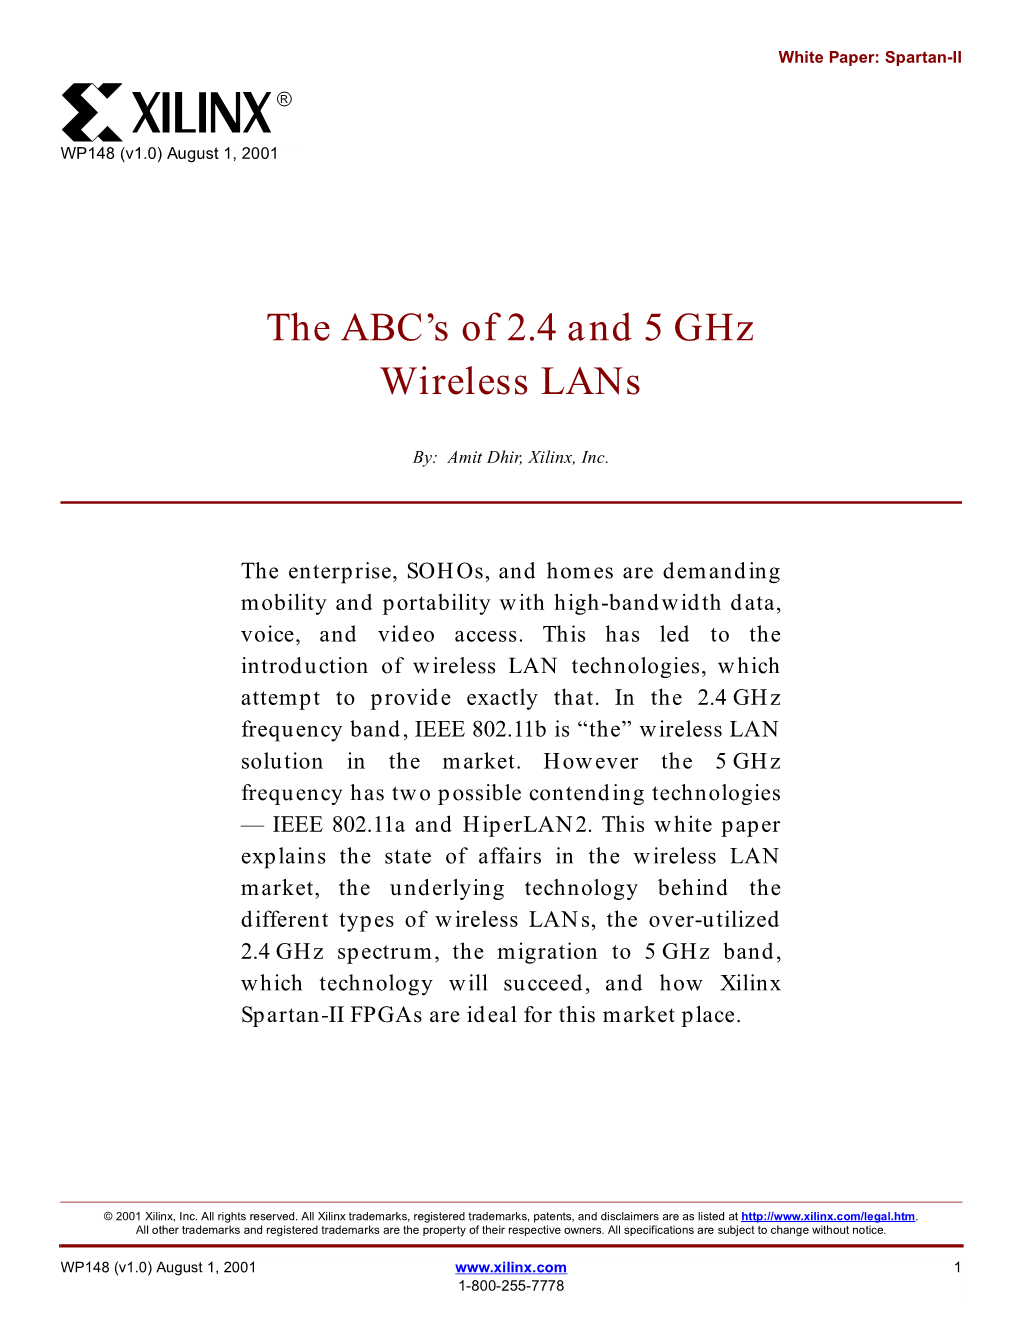 White Paper: the ABC's of 2.4 and 5 Ghx Wireless Lans